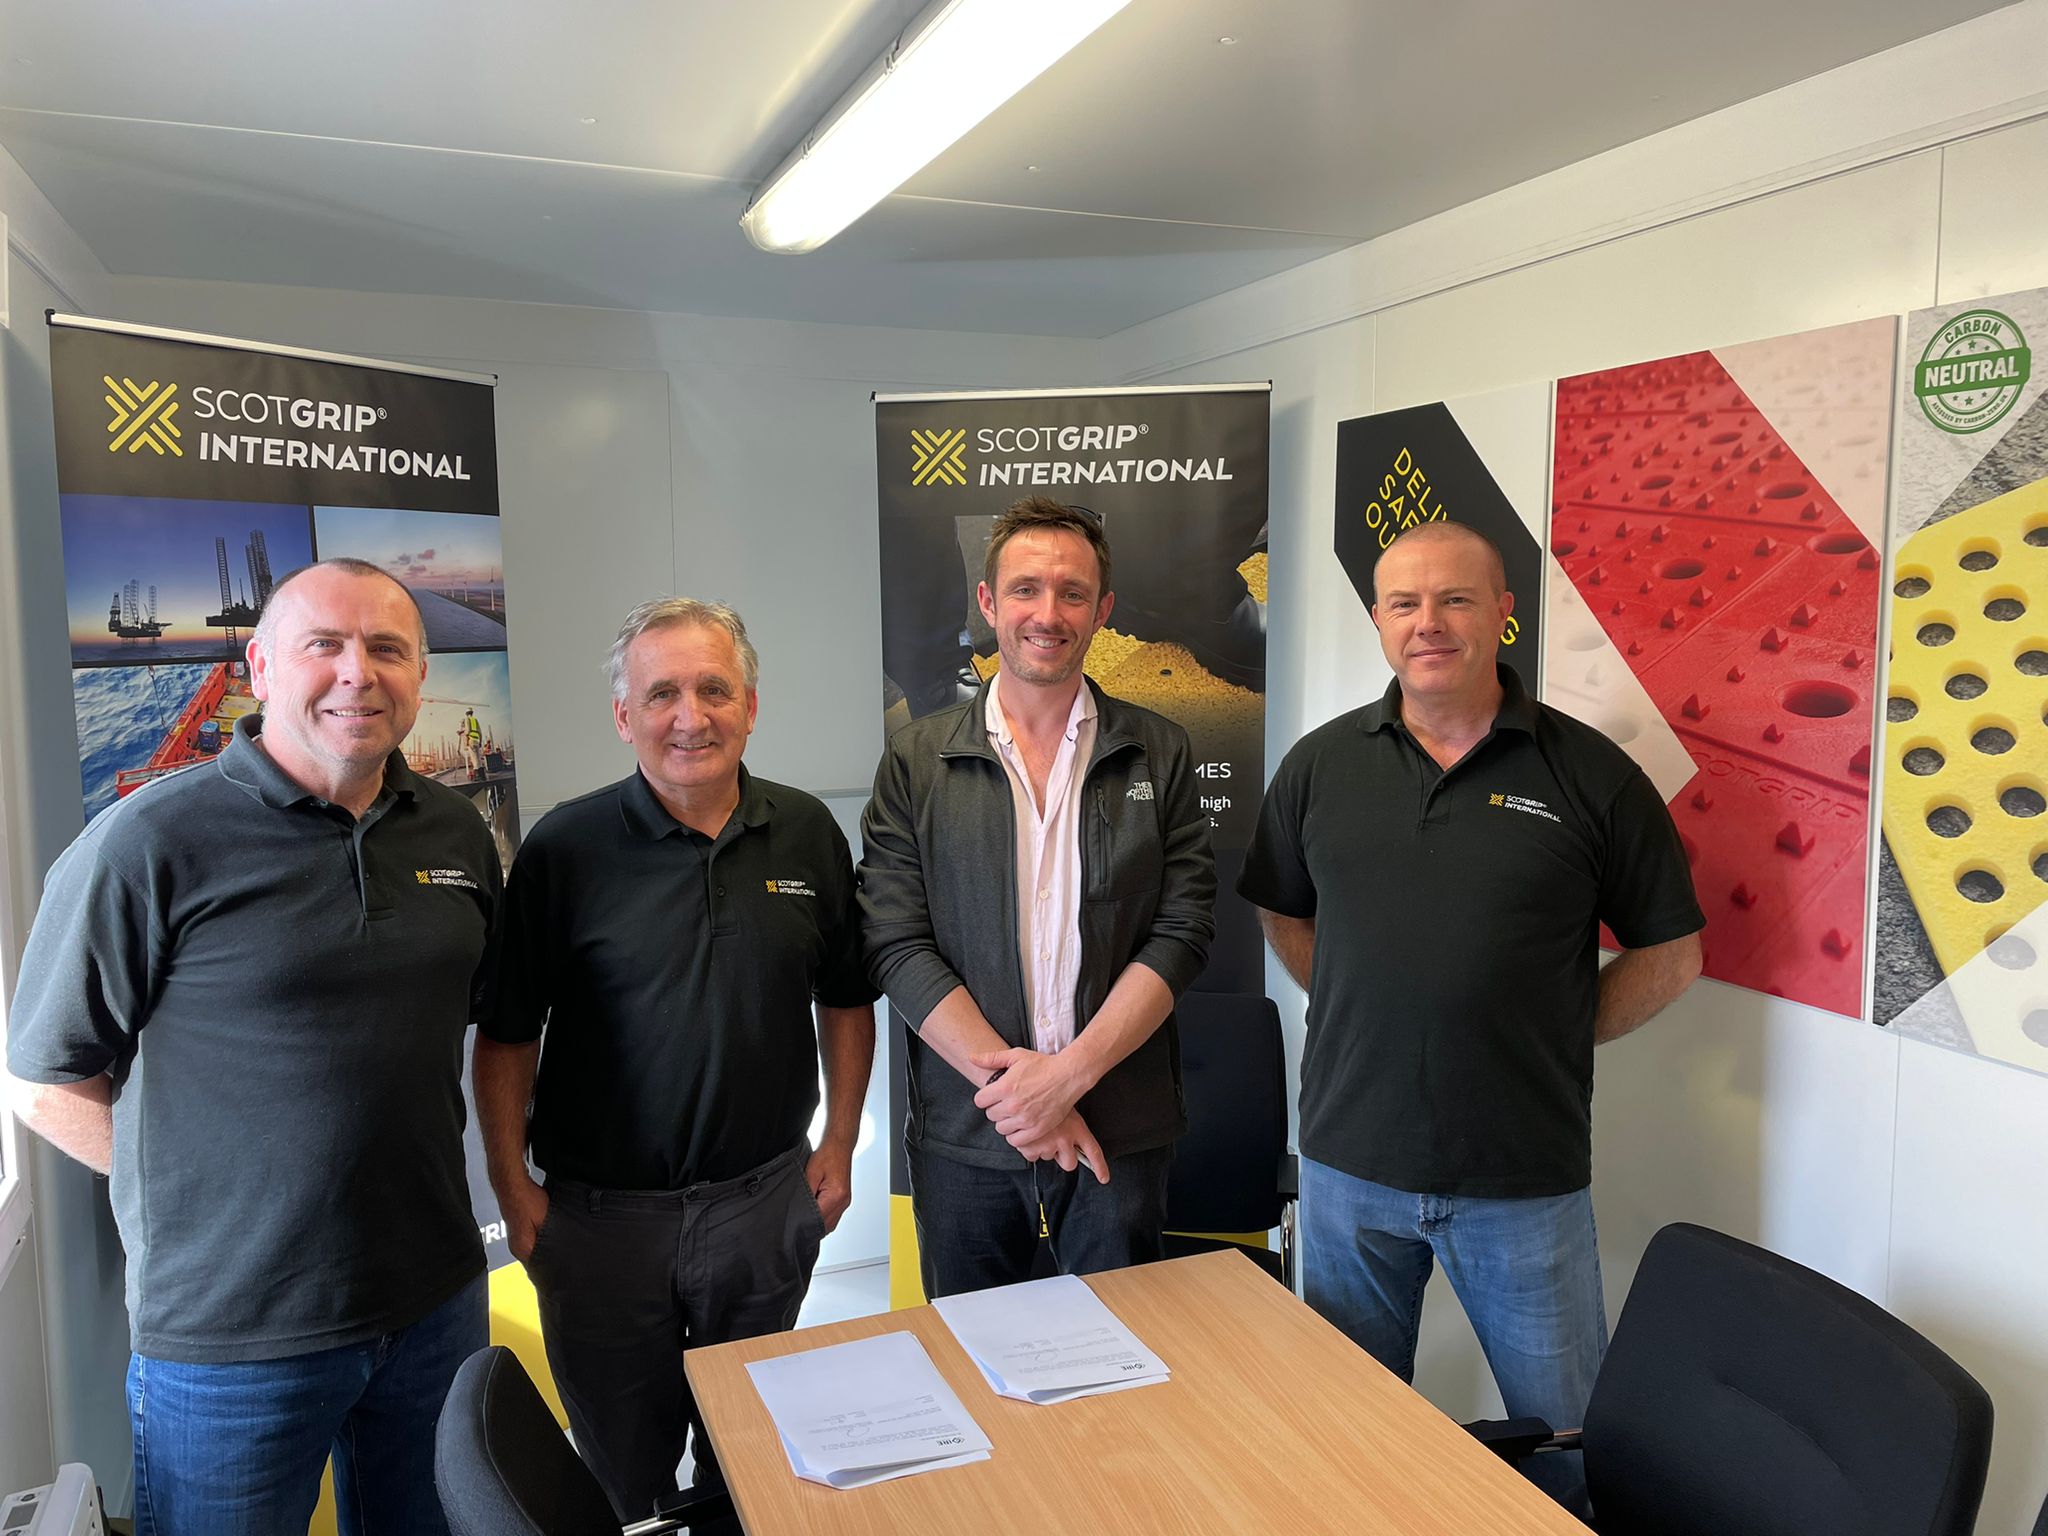 MEMBER NEWS: Scotgrip International furthers global expansion with IRE Oil & Gas FZE partnership